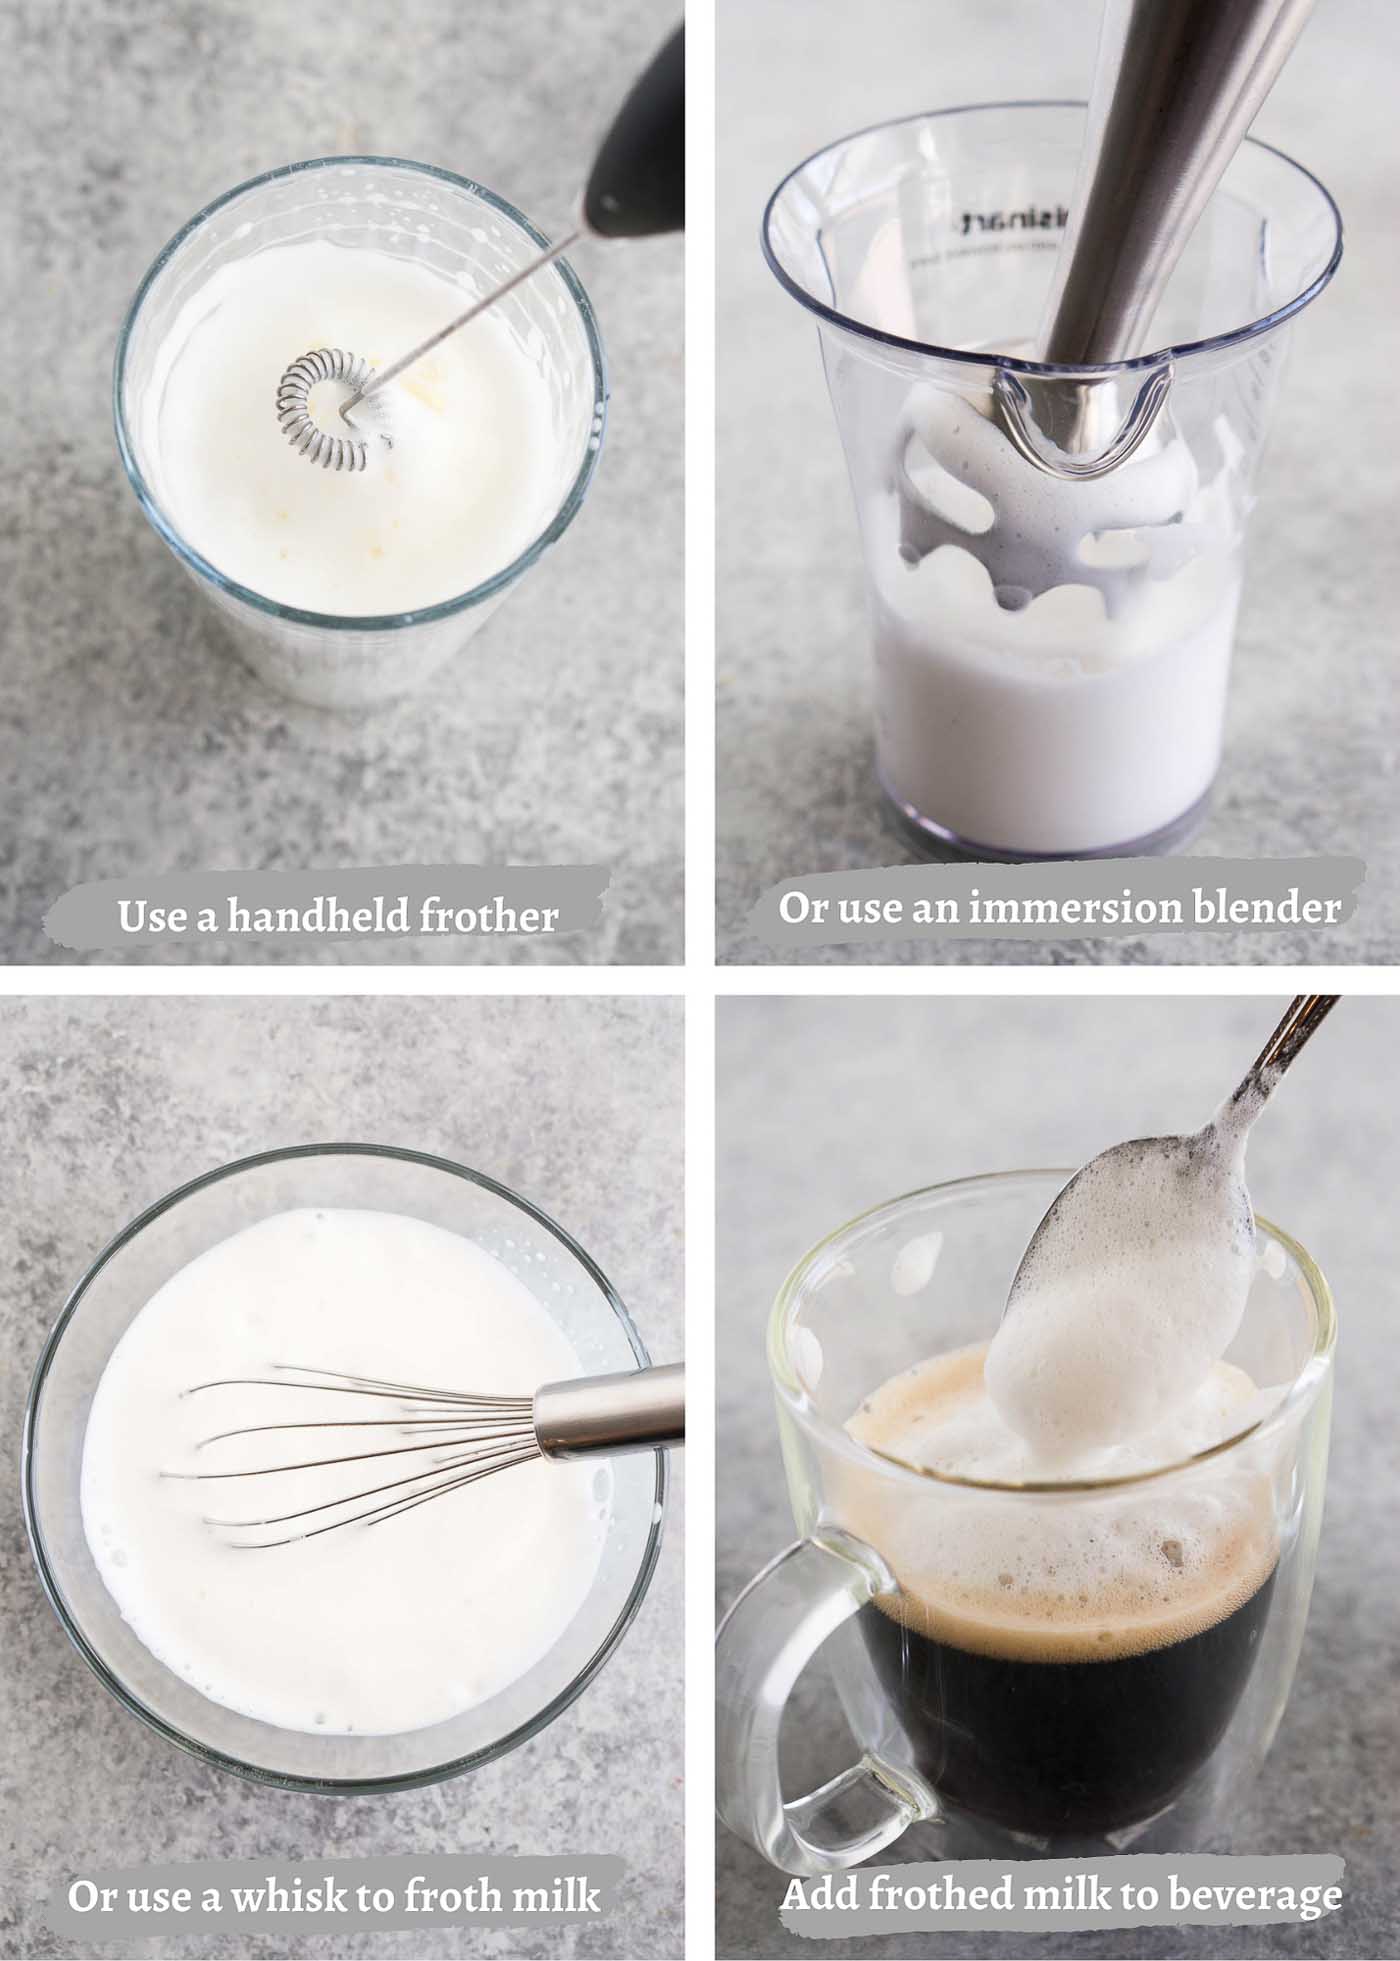 How to Froth Milk With a Hand Frother? 